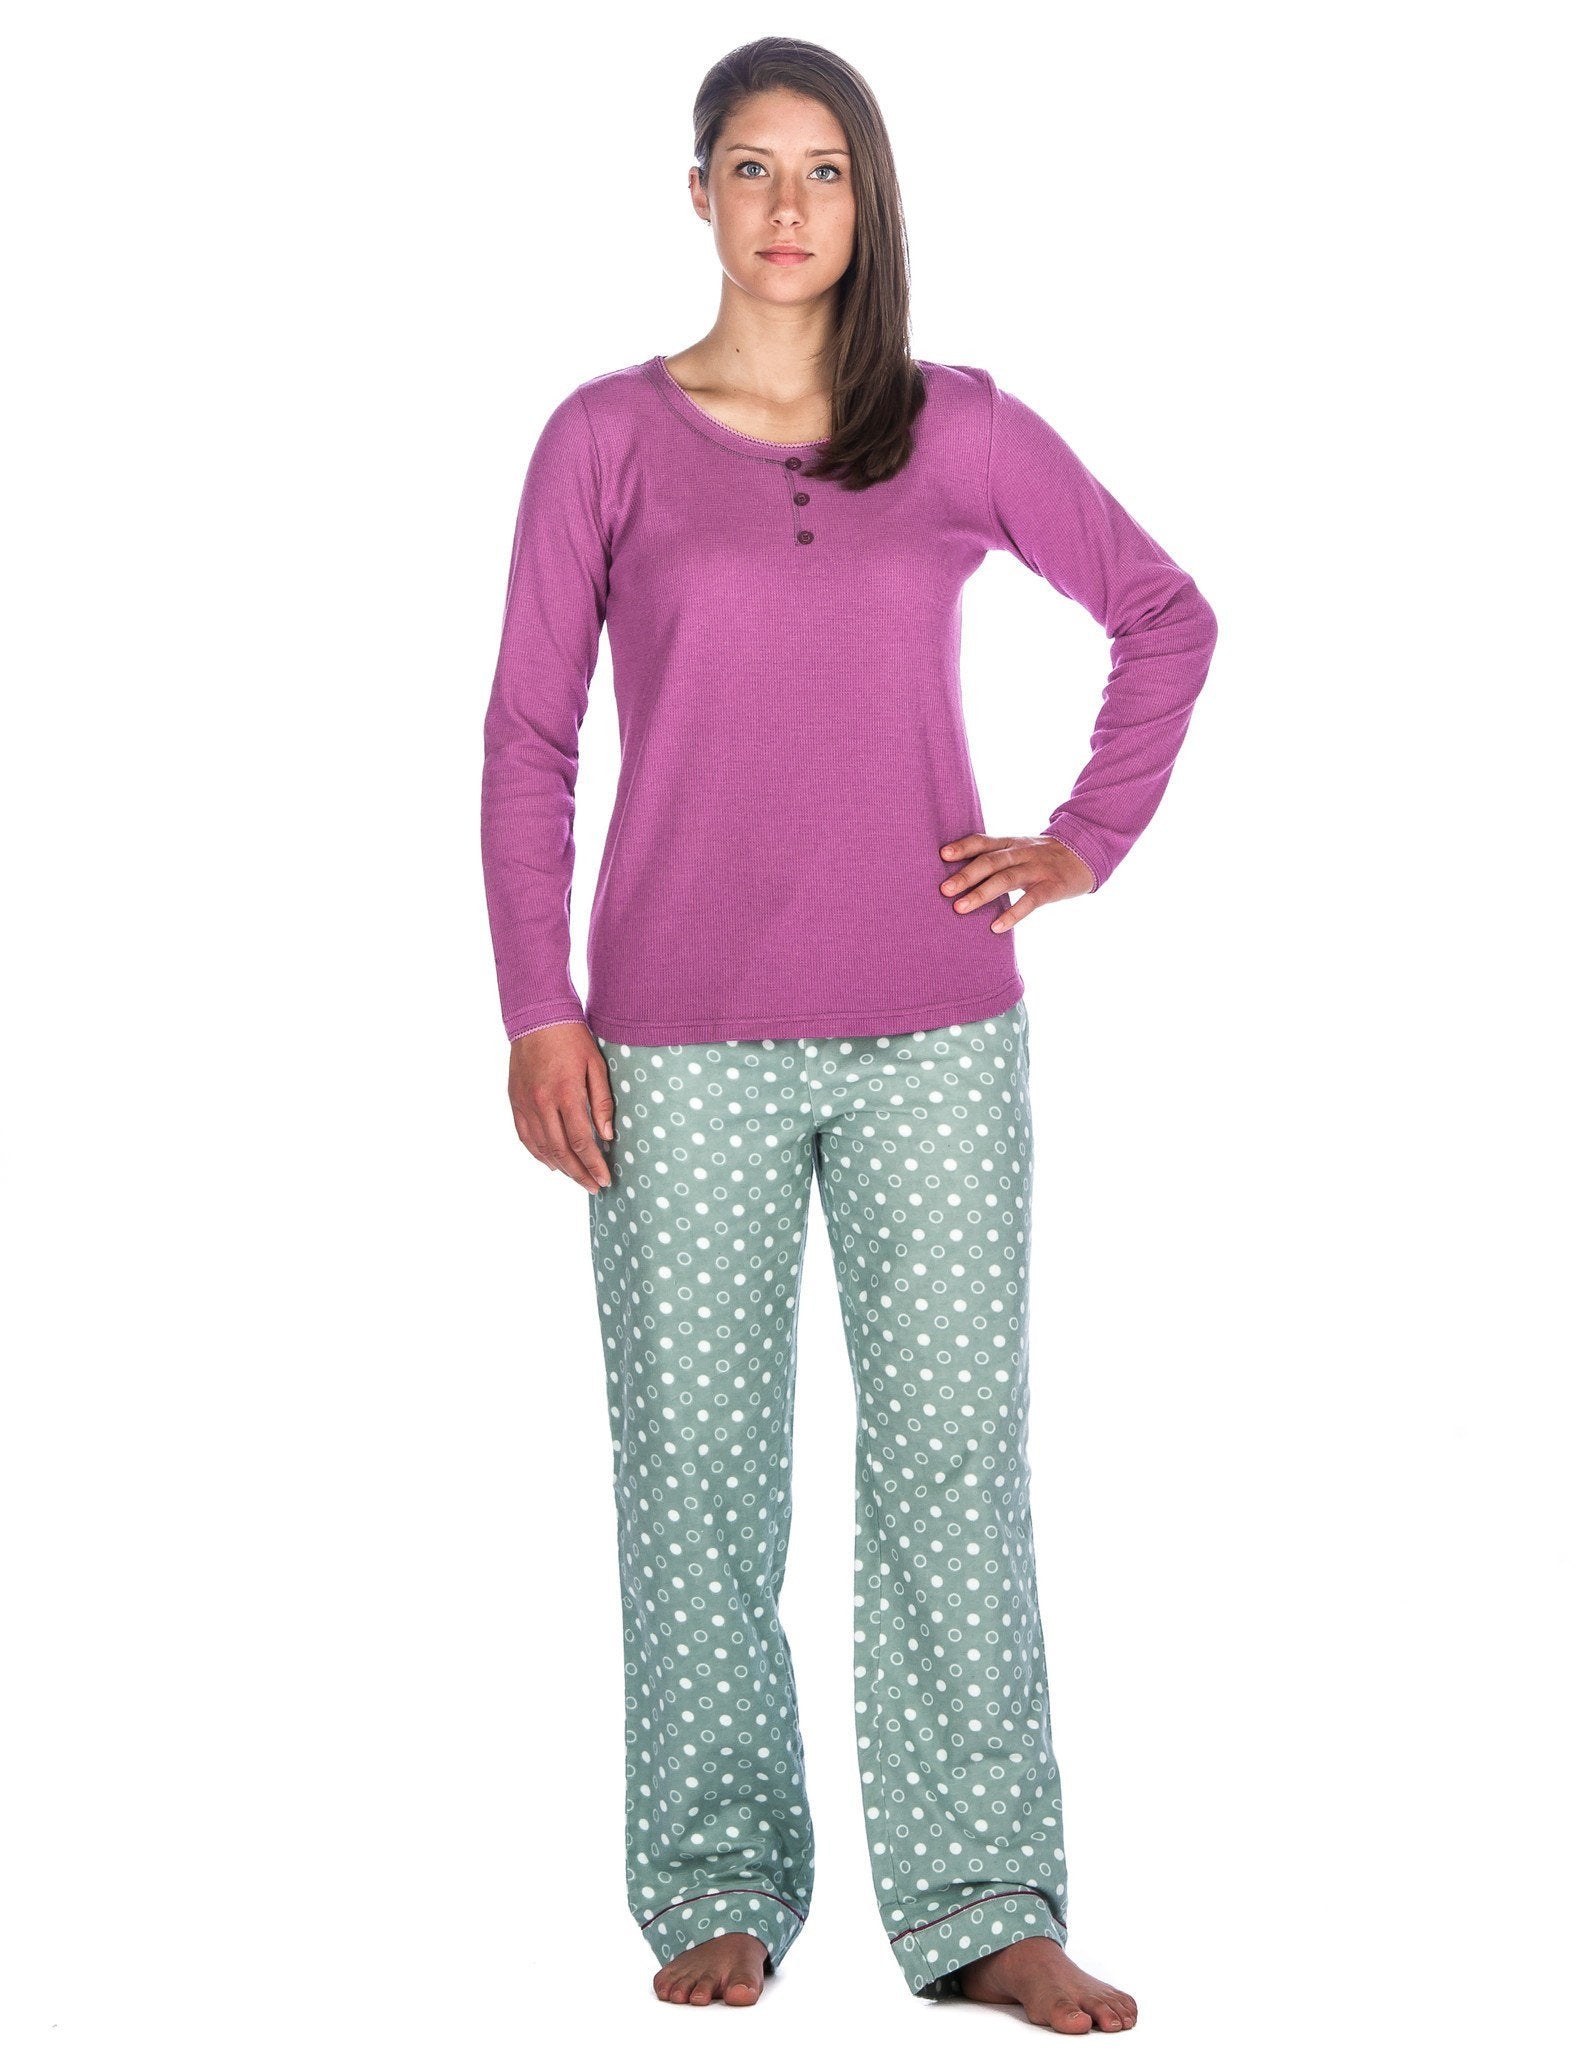 Relaxed Fit Womens Cotton Flannel Lounge Set with Crew Neck Top - Polka Circles Green